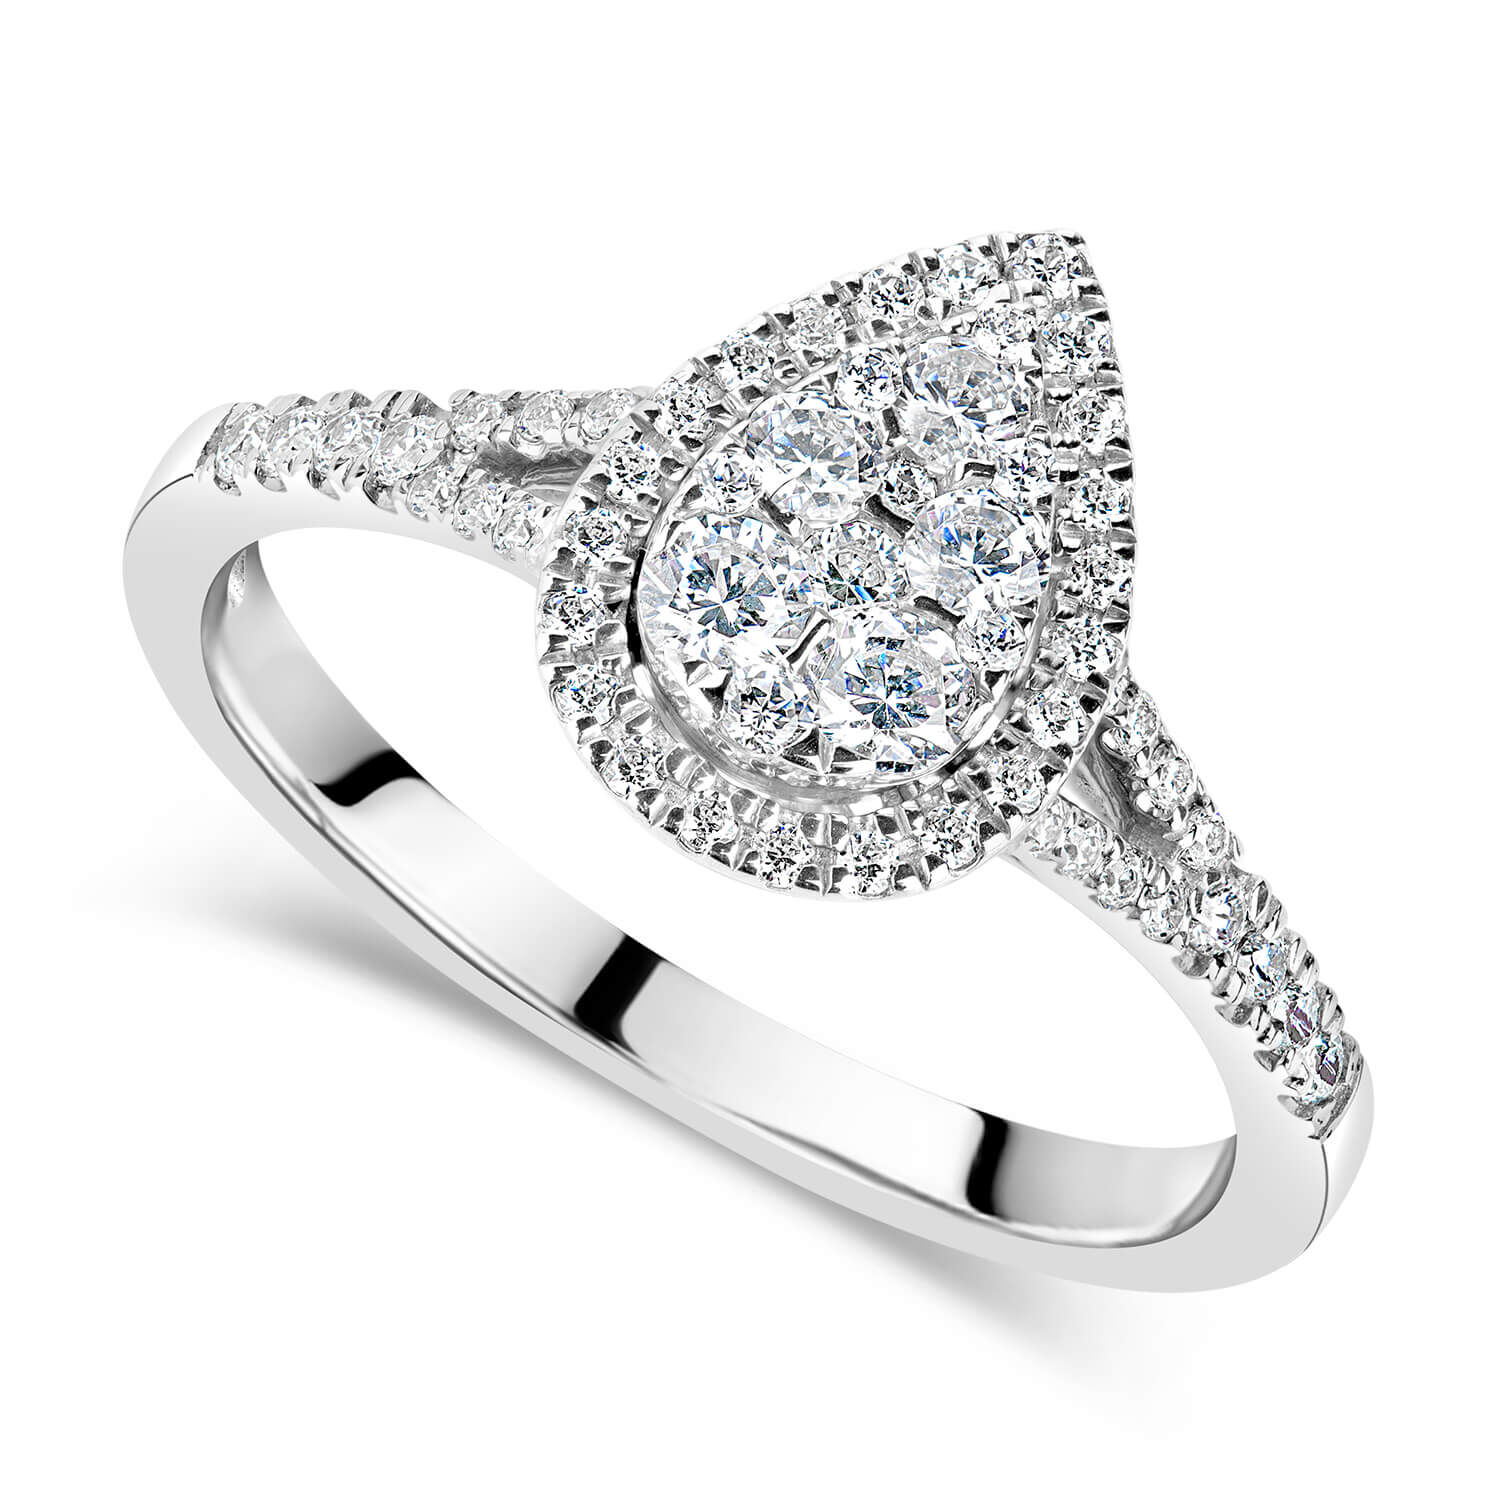 Discover the Platinum Engagement Rings Collection at Berry's